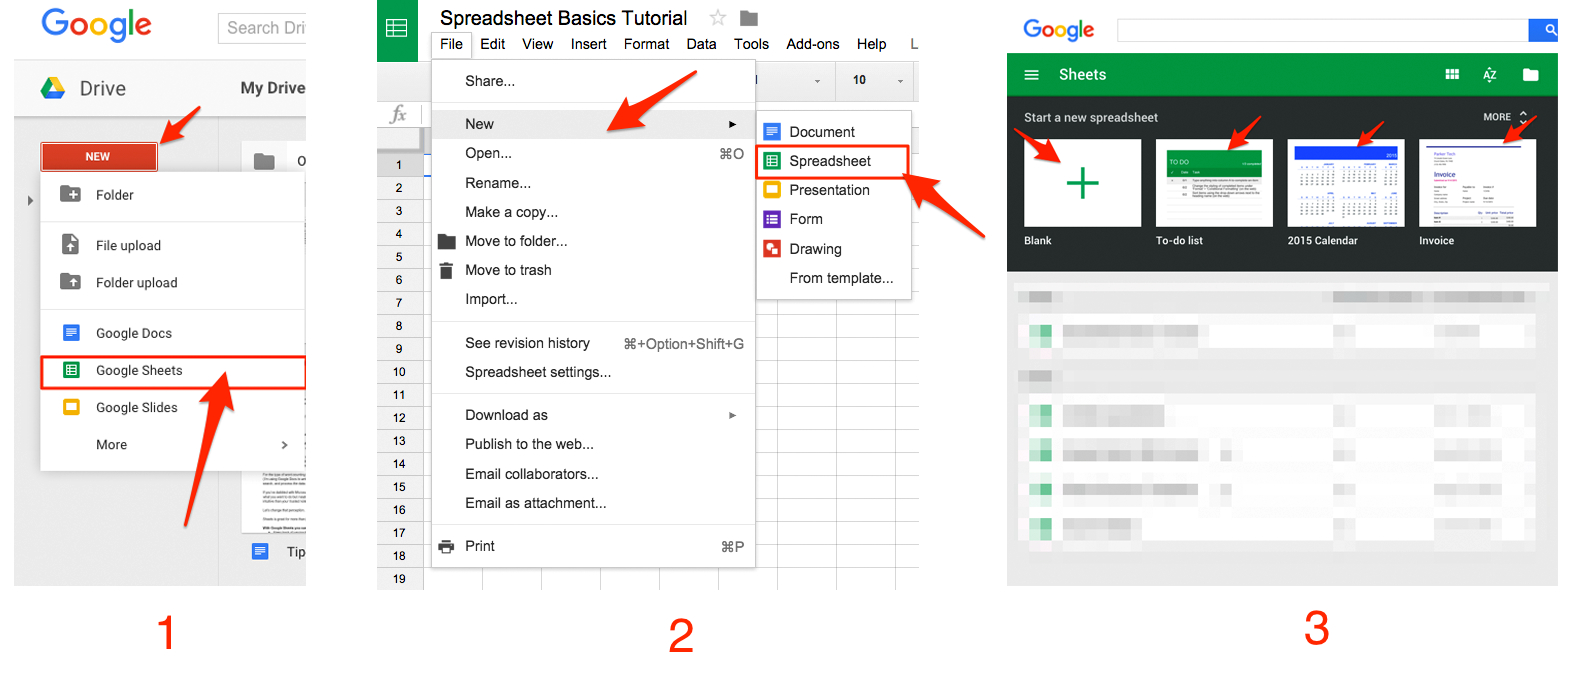 Docs Google Com Spreadsheets For Google Sheets 101: The Beginner's Guide To Online Spreadsheets  The